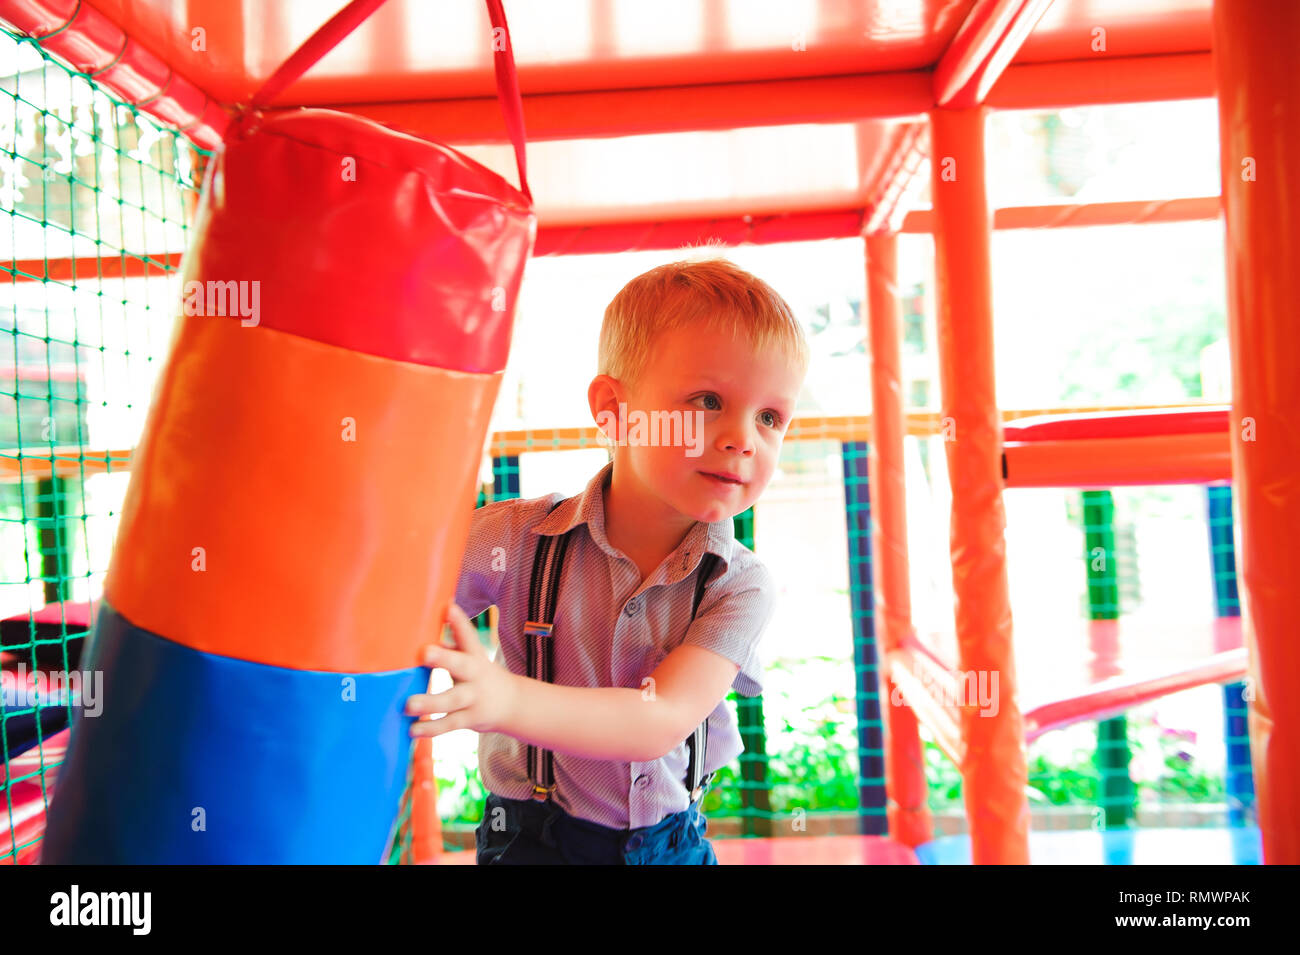 Indoor playground with colorful plastic balls for children. Stock Photo